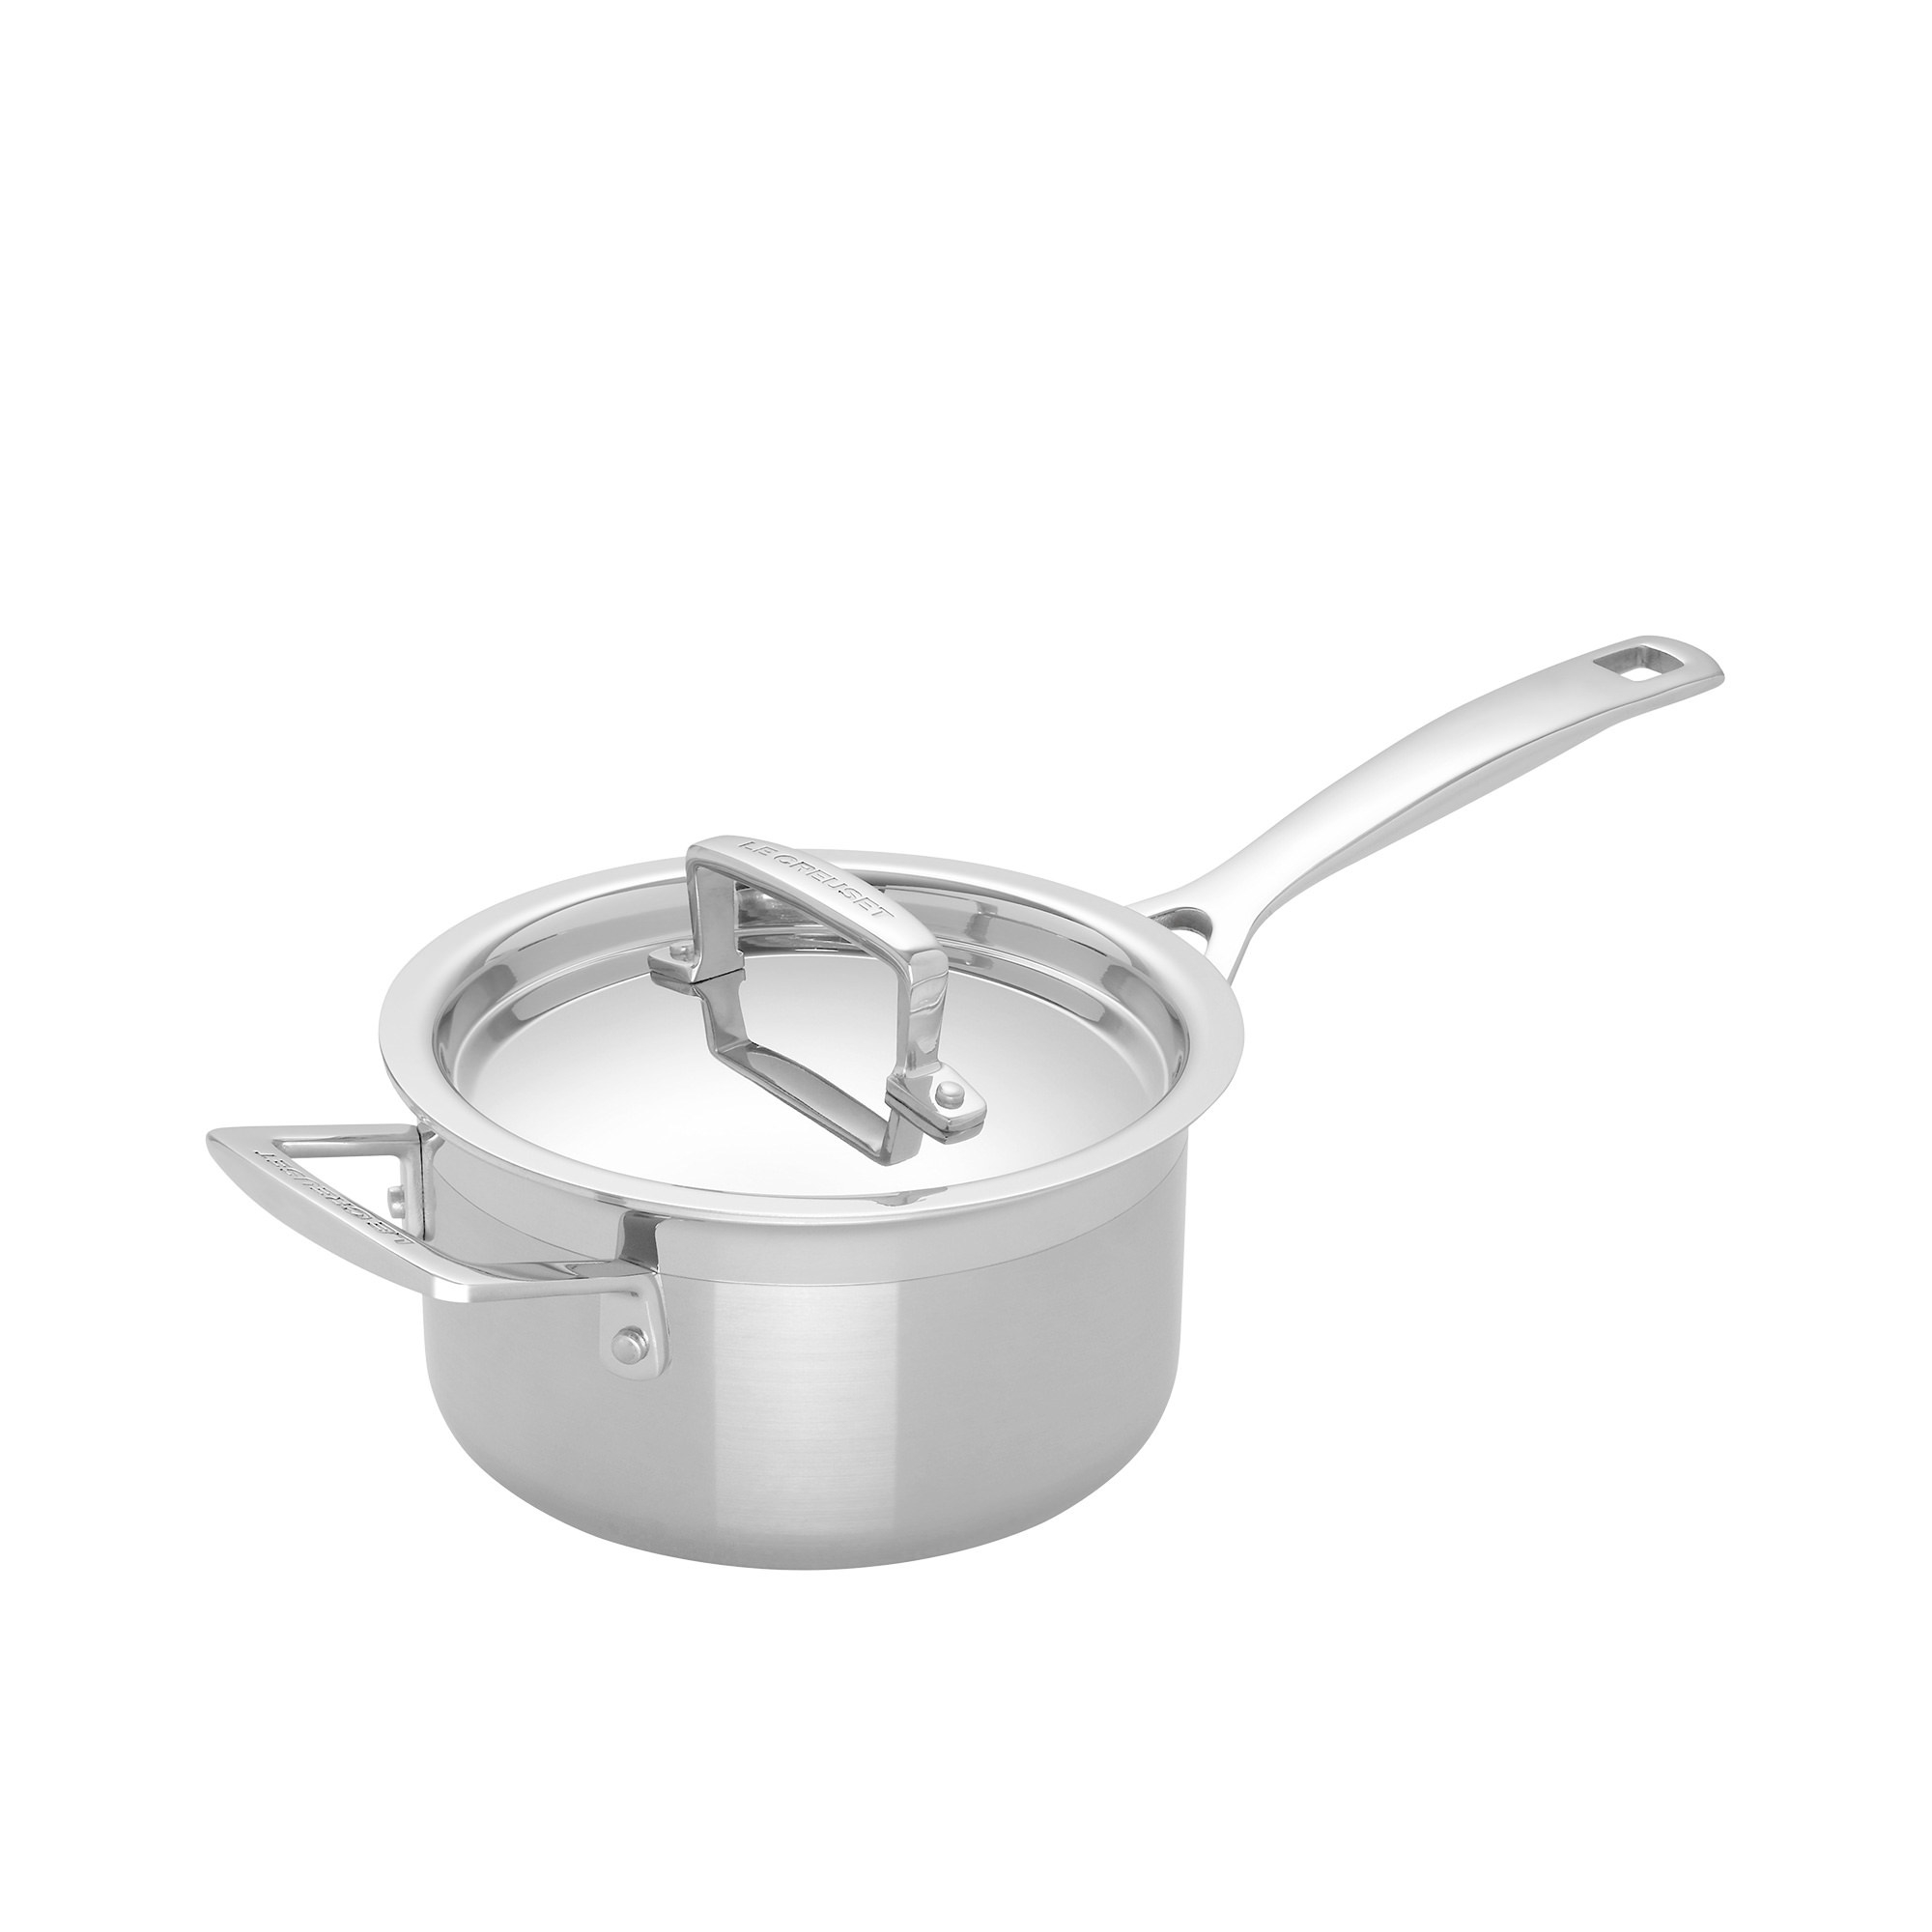 Le Creuset 3-Ply Stainless Steel Saucepan with Lid 16cm - 1.9L Image 1